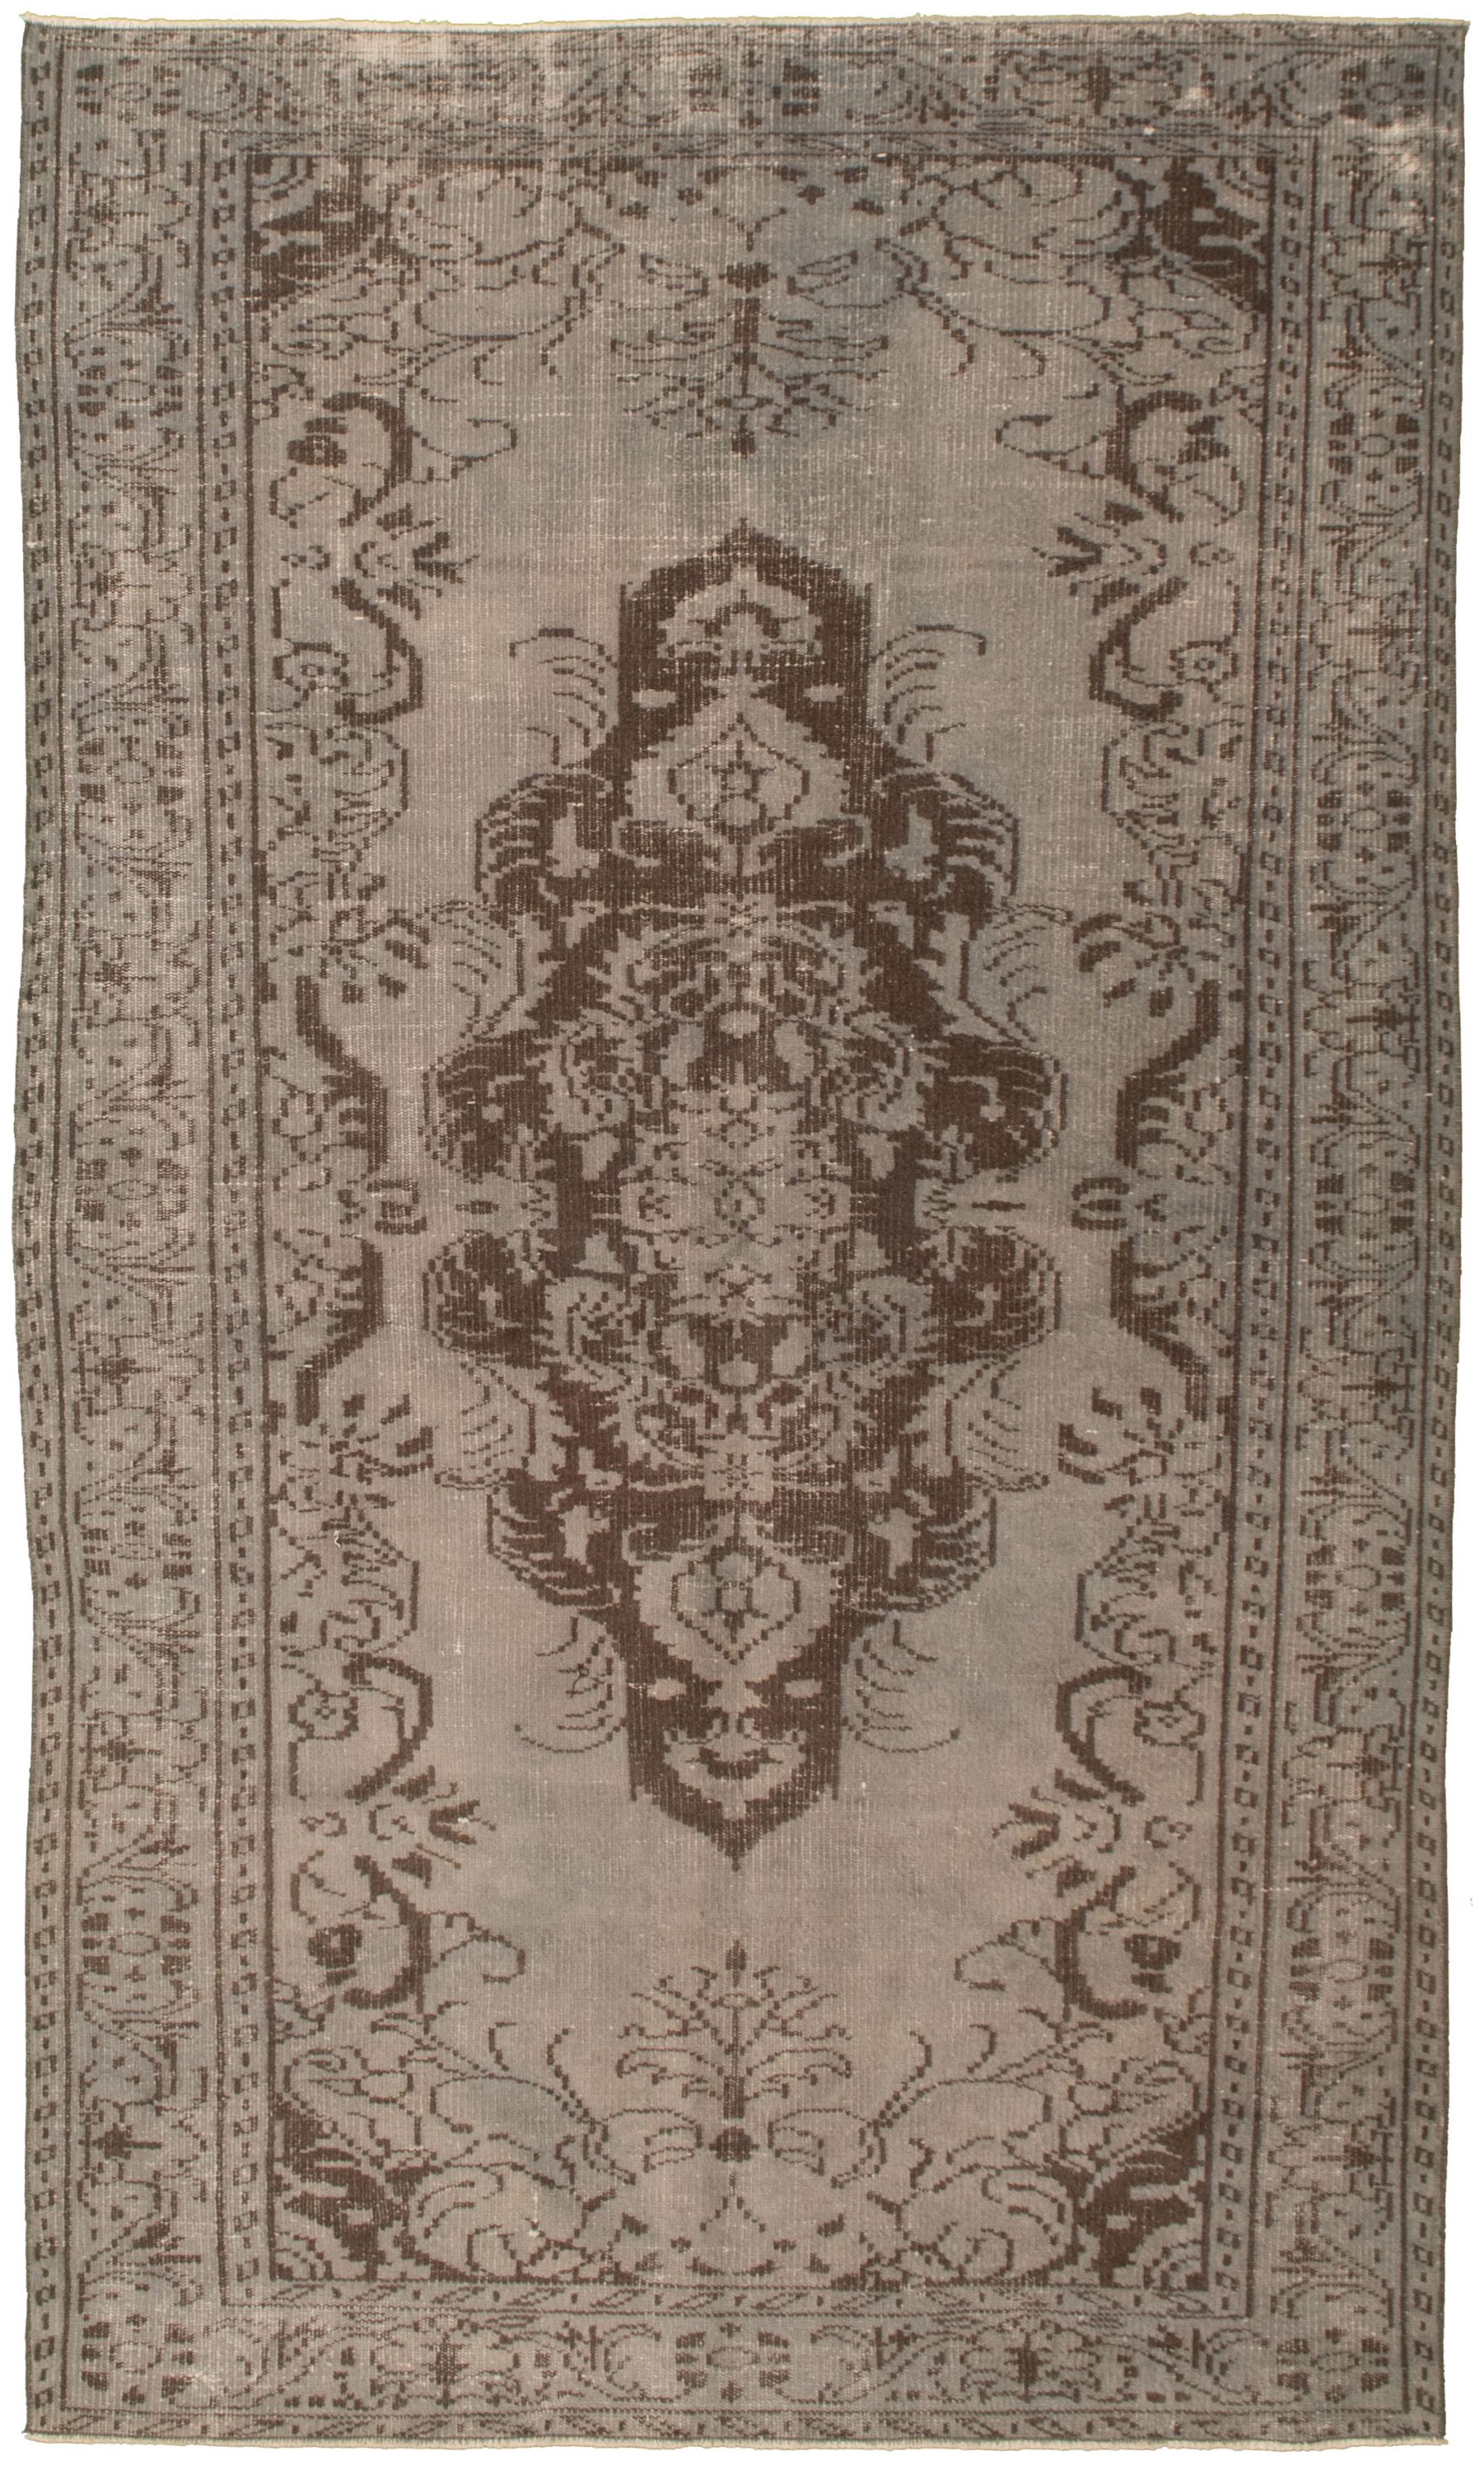 Hand-knotted Color Transition Grey Wool Rug 5'0" x 8'8" Size: 5'0" x 8'8"  